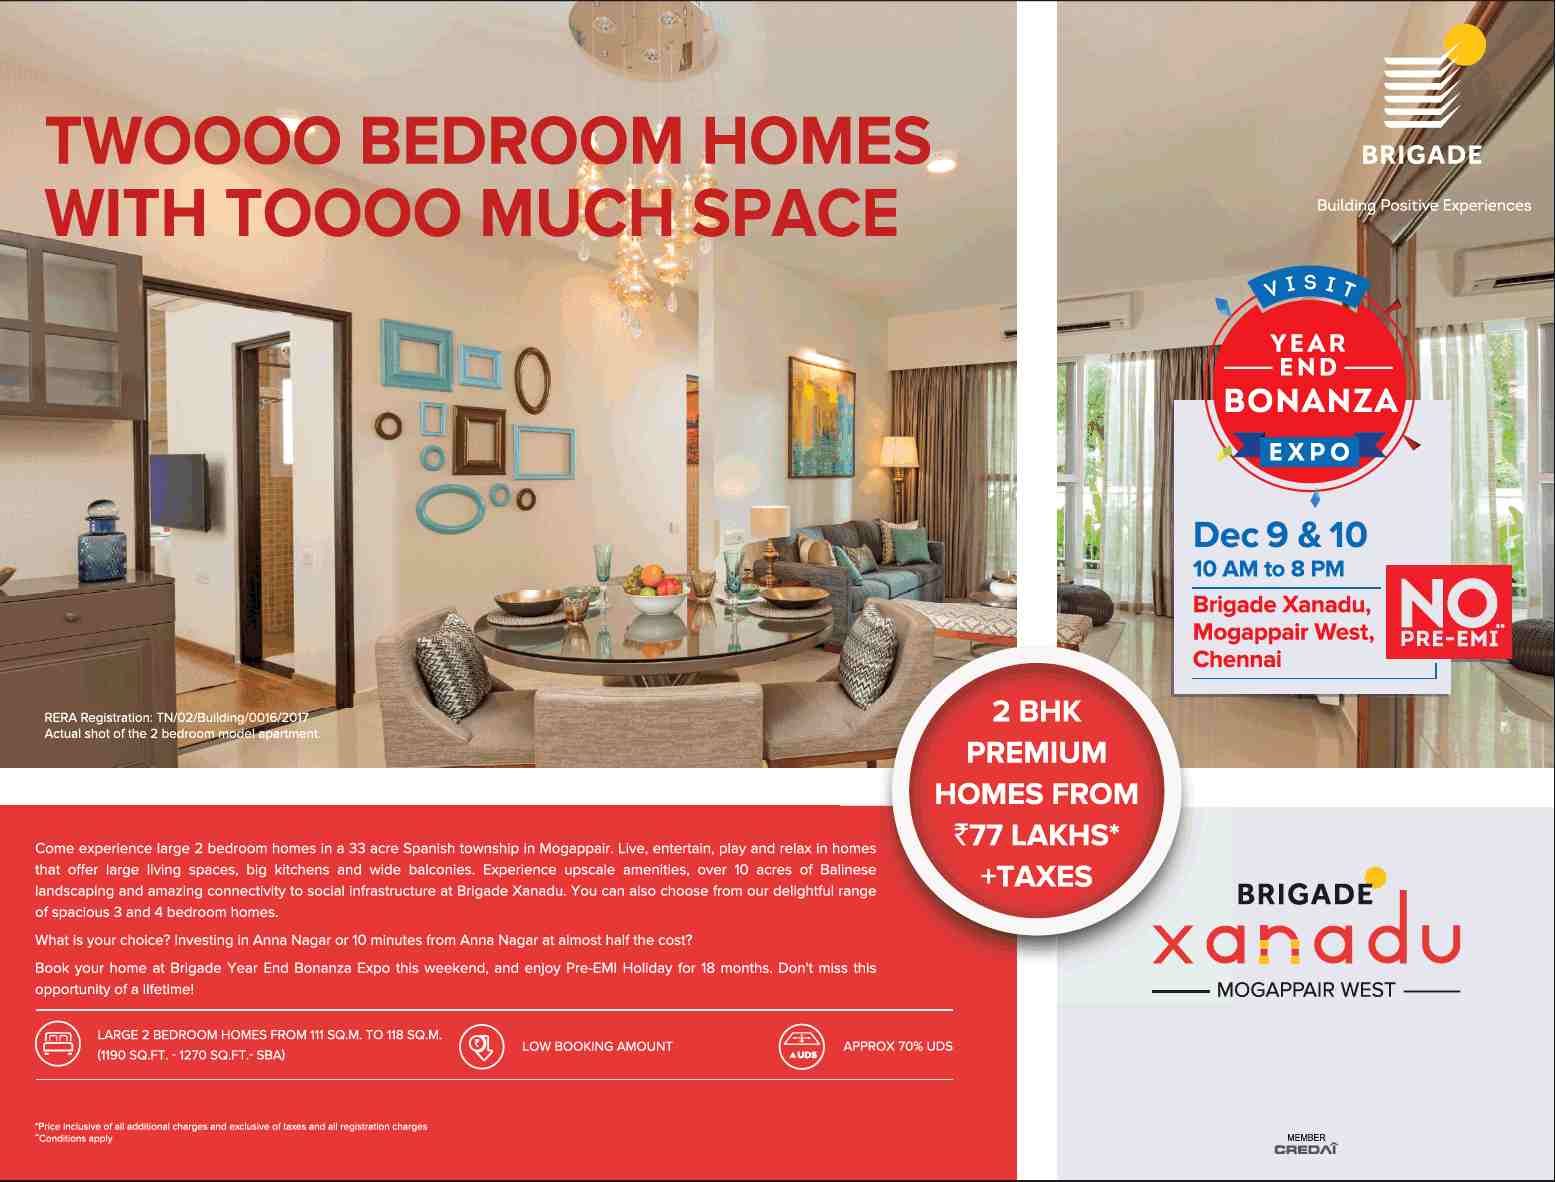 Live in two bedroom homes with too much space at Brigade Xanadu in Chennai